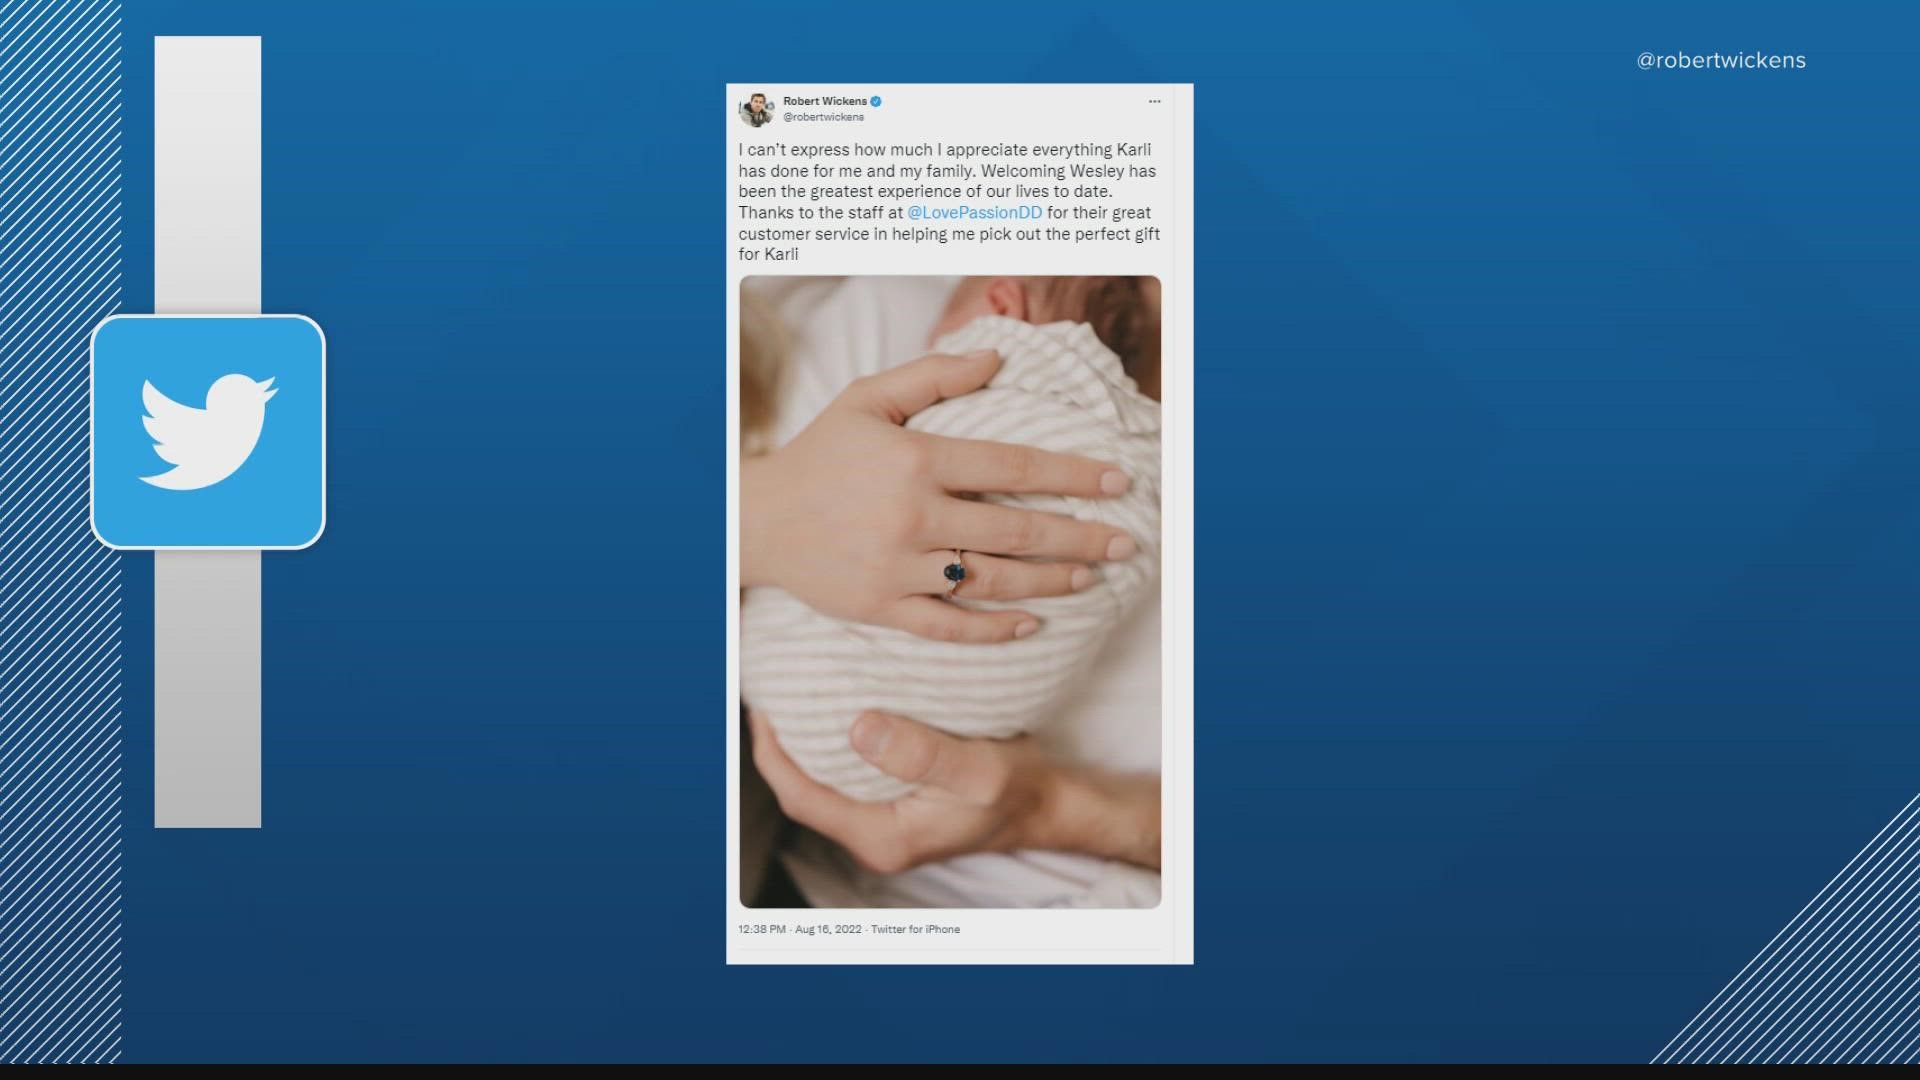 He shared the news in a tweet, with a picture of his wife Karli holding their baby Wesley.